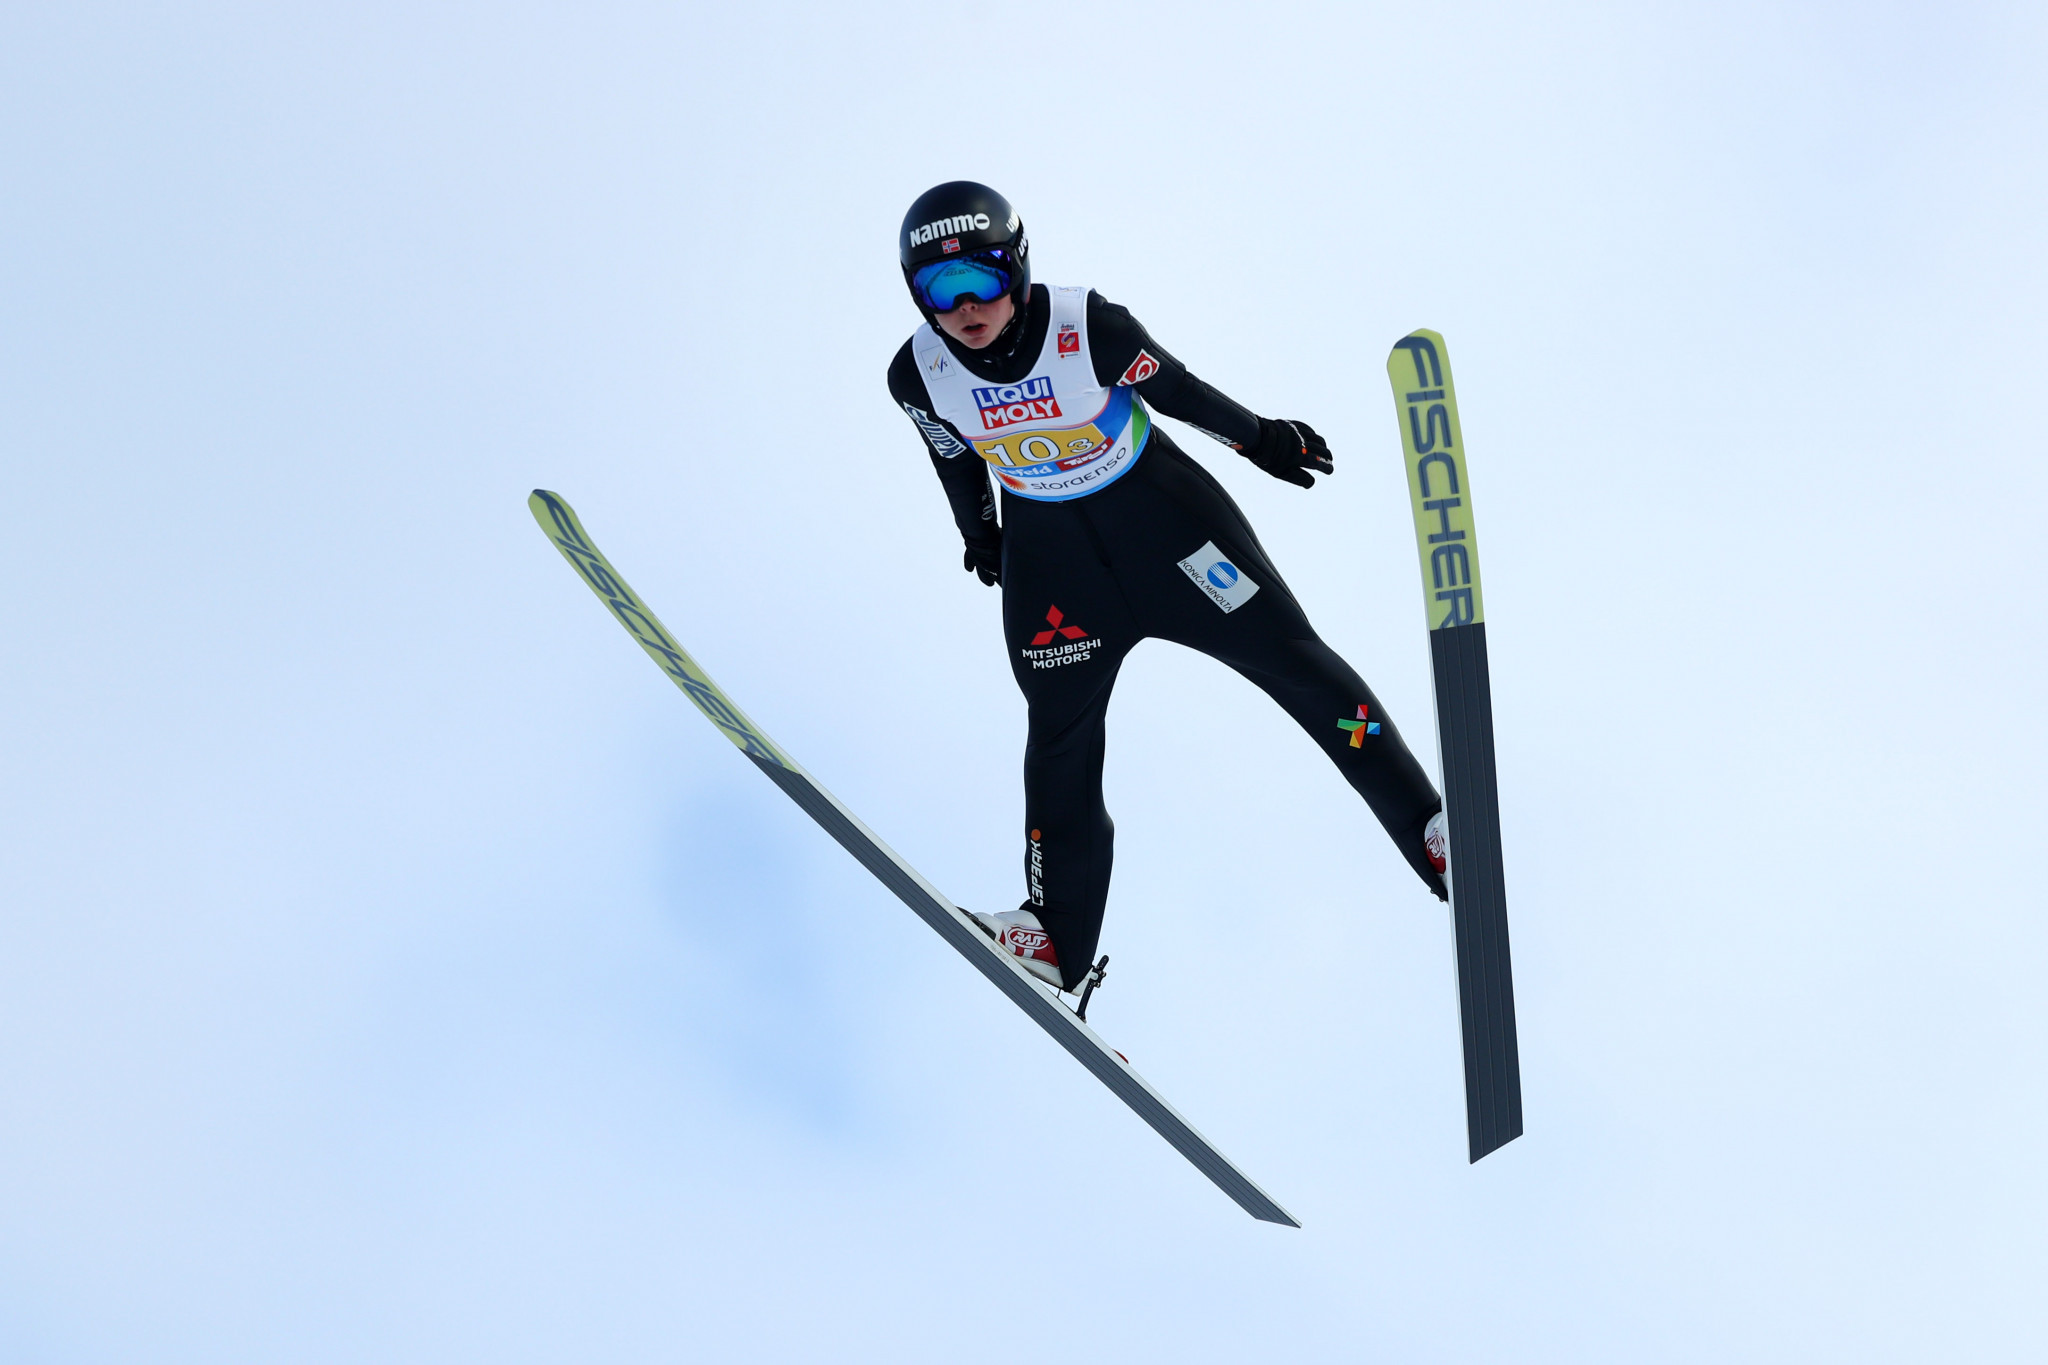 Olympic champion Lundby looks to get back on track at FIS Ski Jumping World Cup in Sapporo